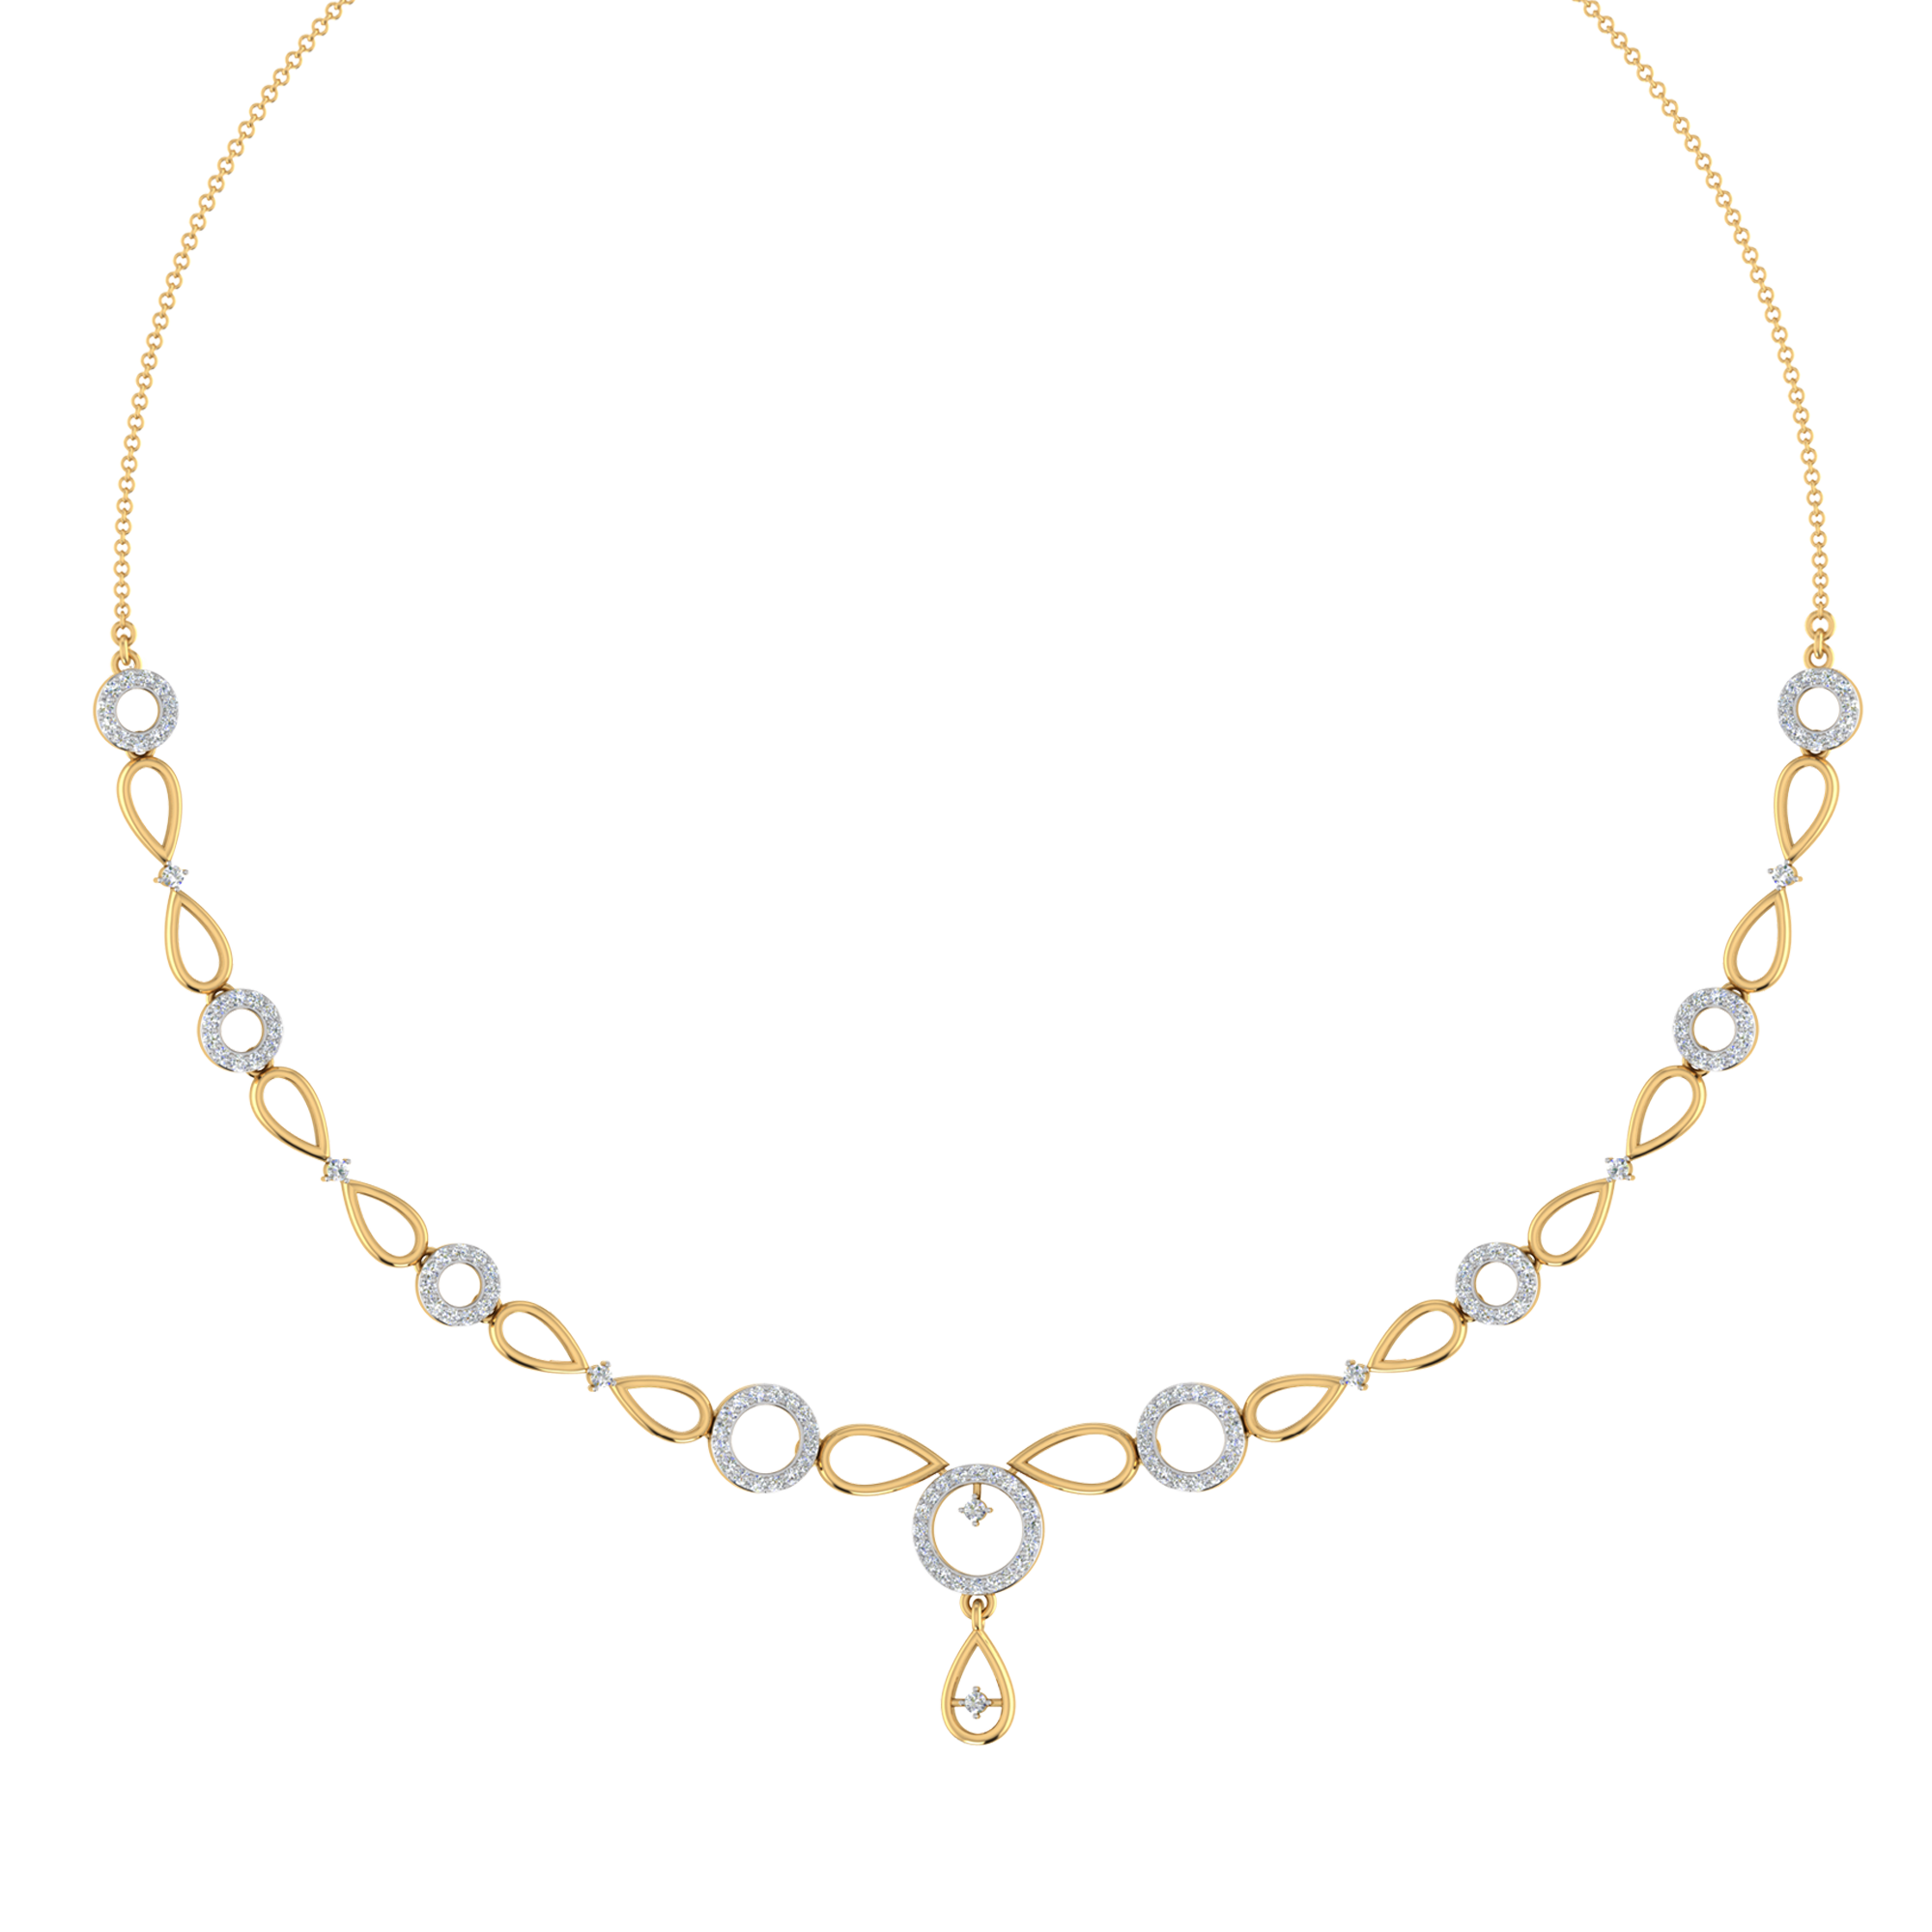 Simple Gold Necklace Designs - South India Jewels